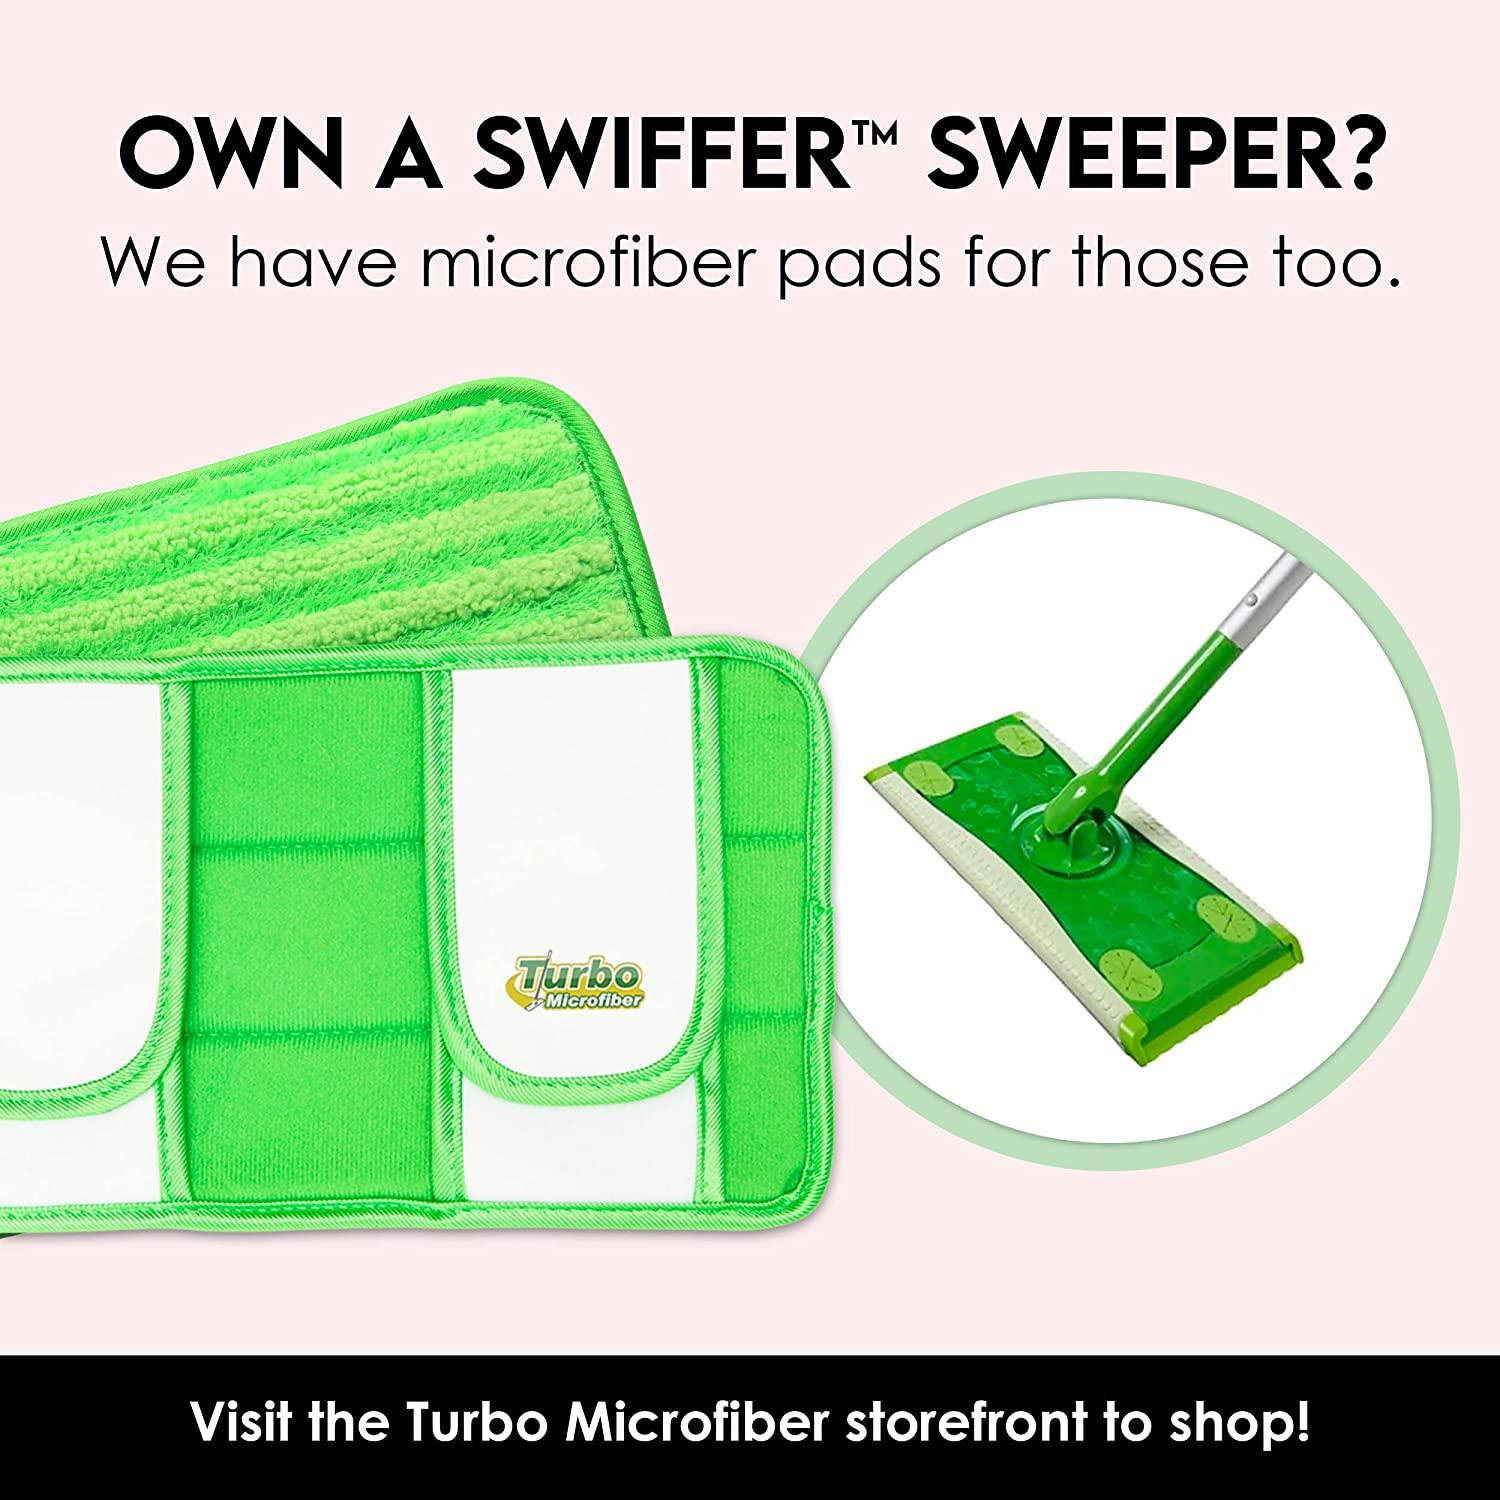 Turbo Microfiber Reusable Mop Pads Fits Swiffer Sweeper 12 Inch, 2